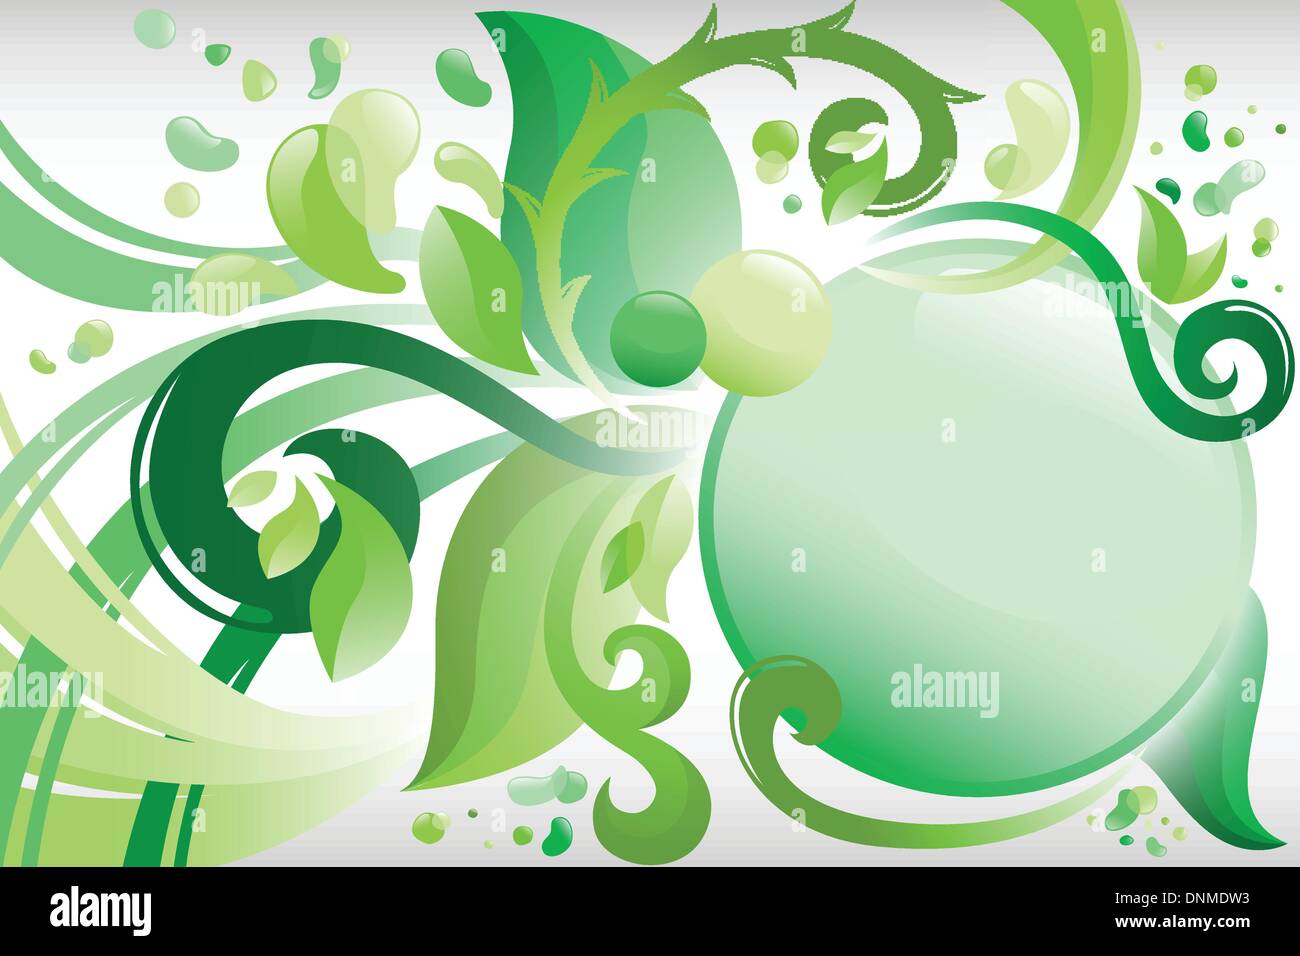 An illustration of an abstract vector background Stock Vector